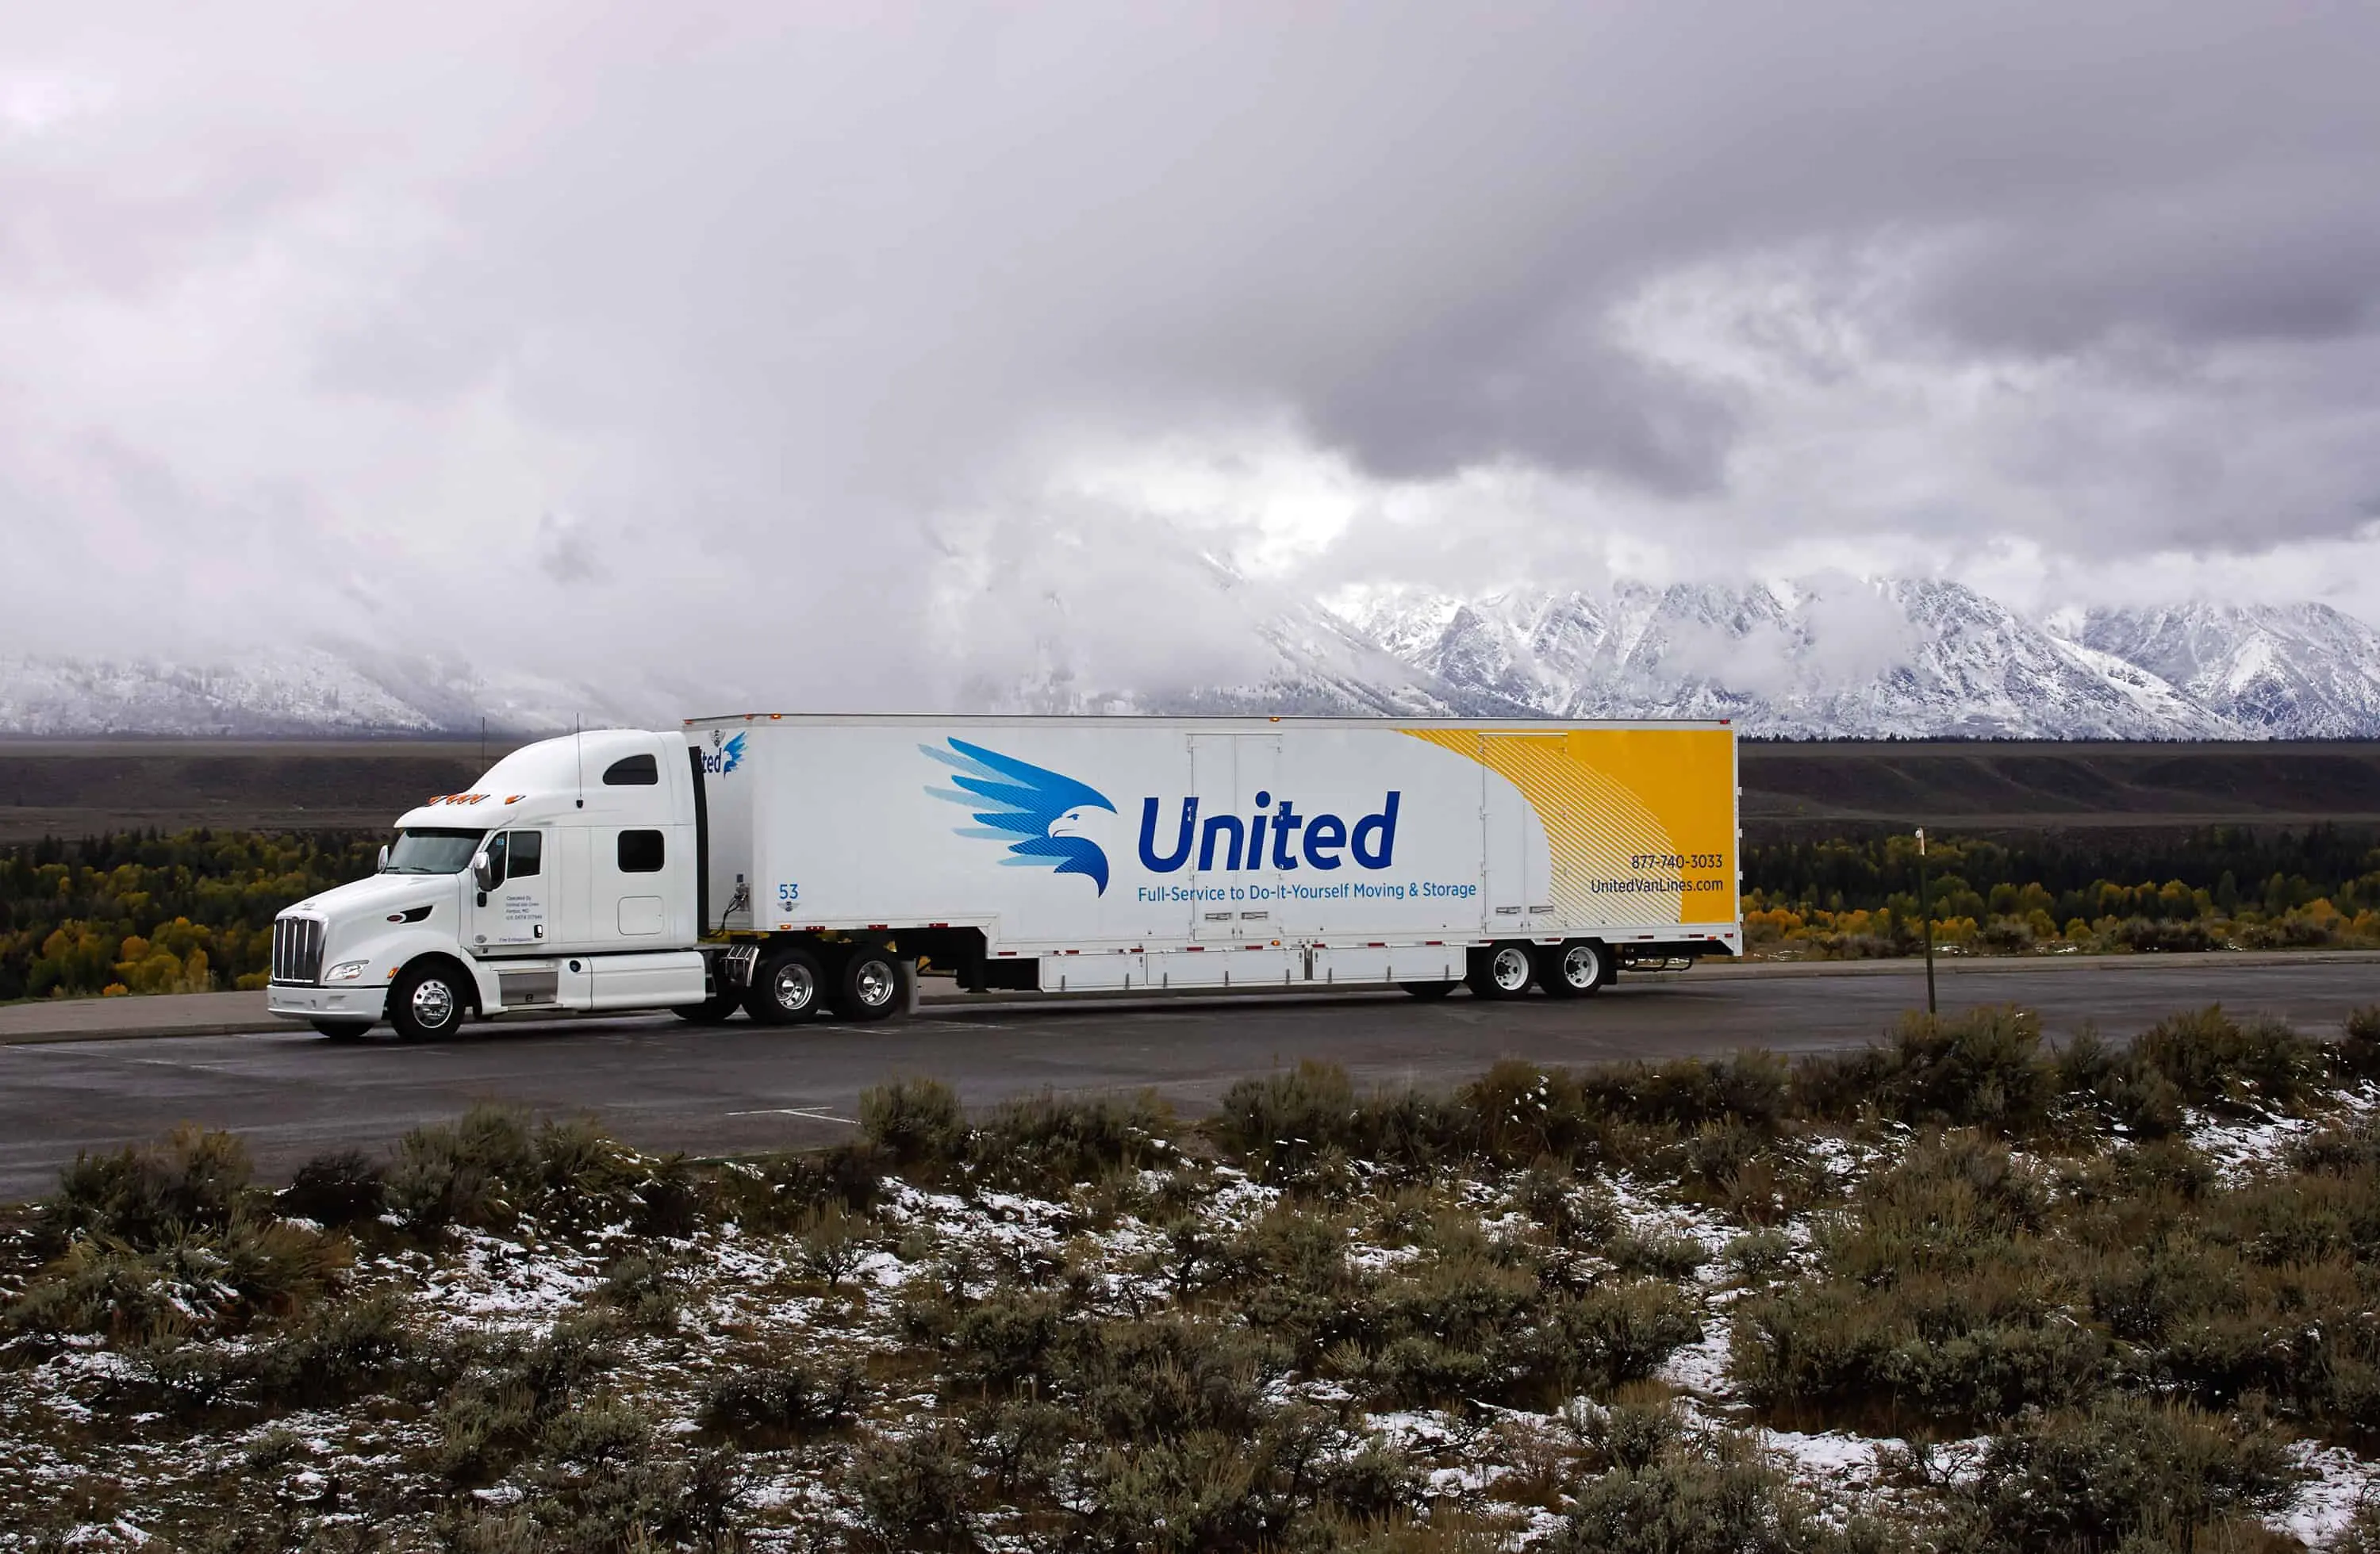 United Van Lines truck driving on a highway with snowy mountains in the background - United Van Lines®